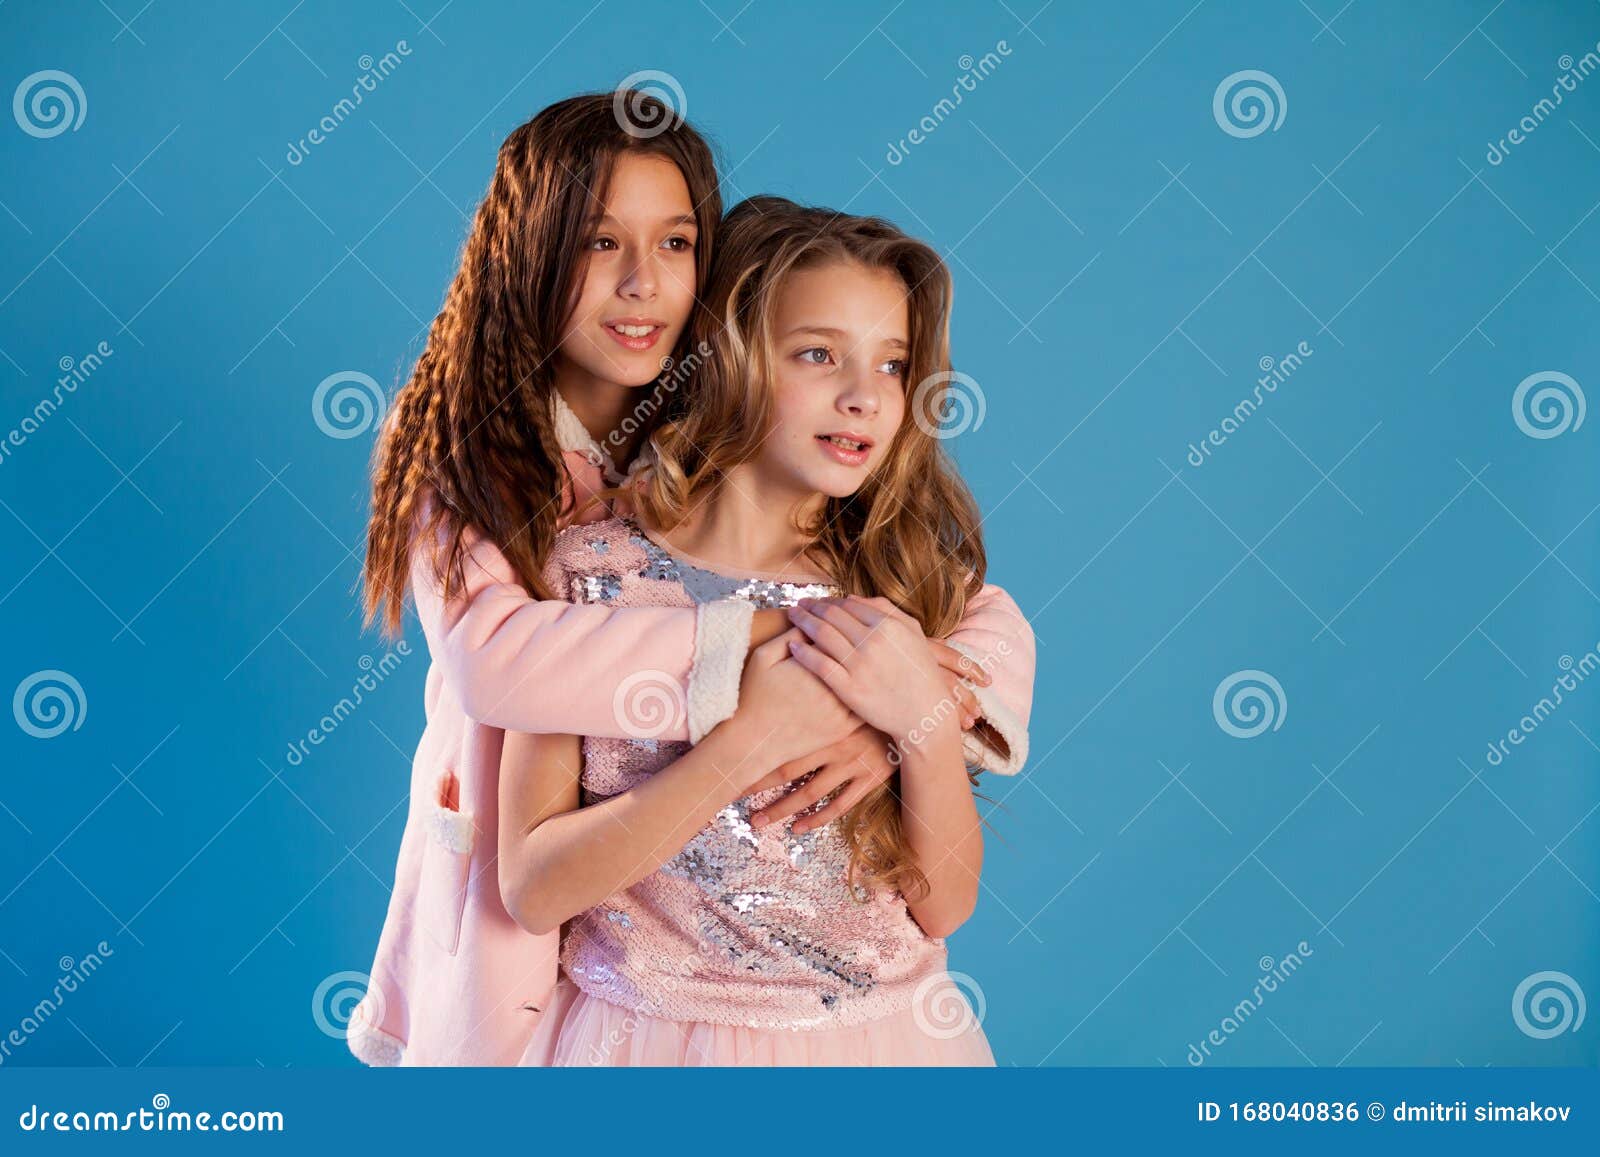 Portrait of Two Beautiful Fashionable Girls in a White Dress and Pink ...